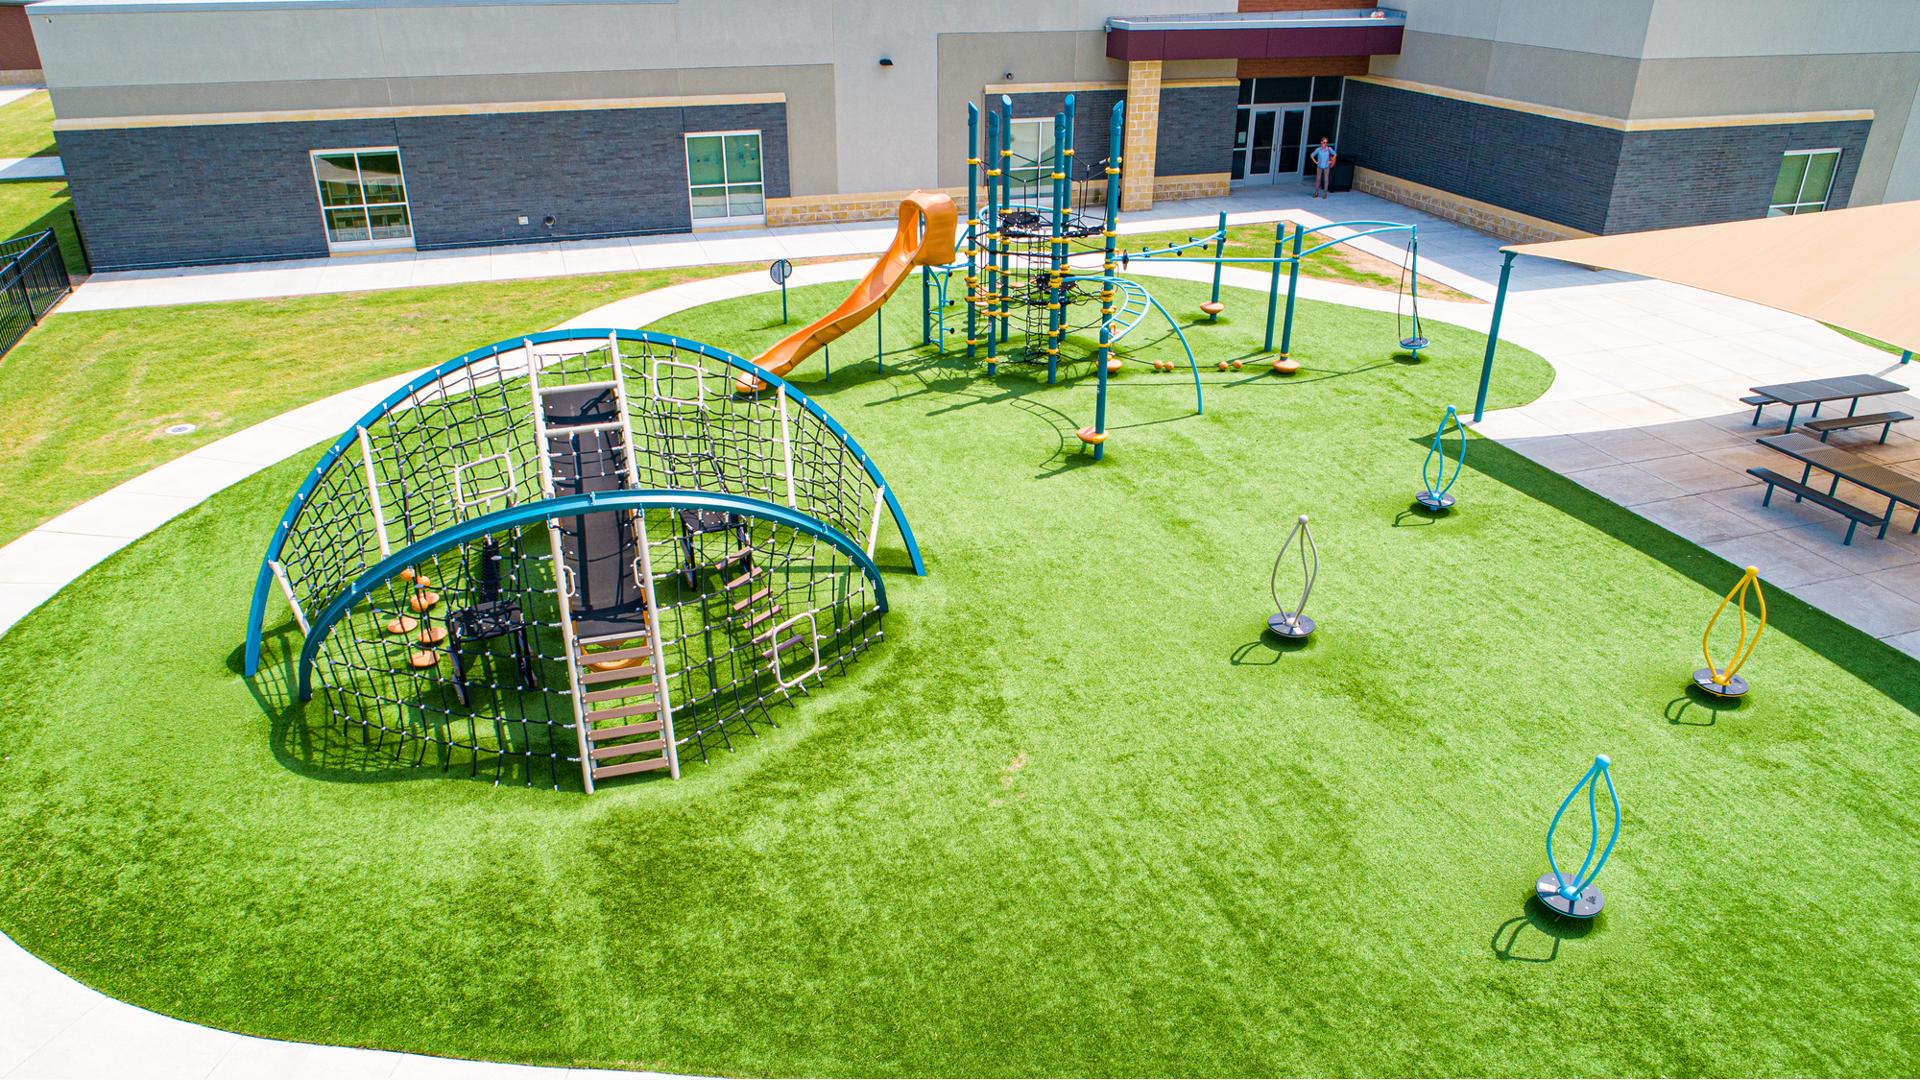 The Crab Trap® and Netplex® play structures